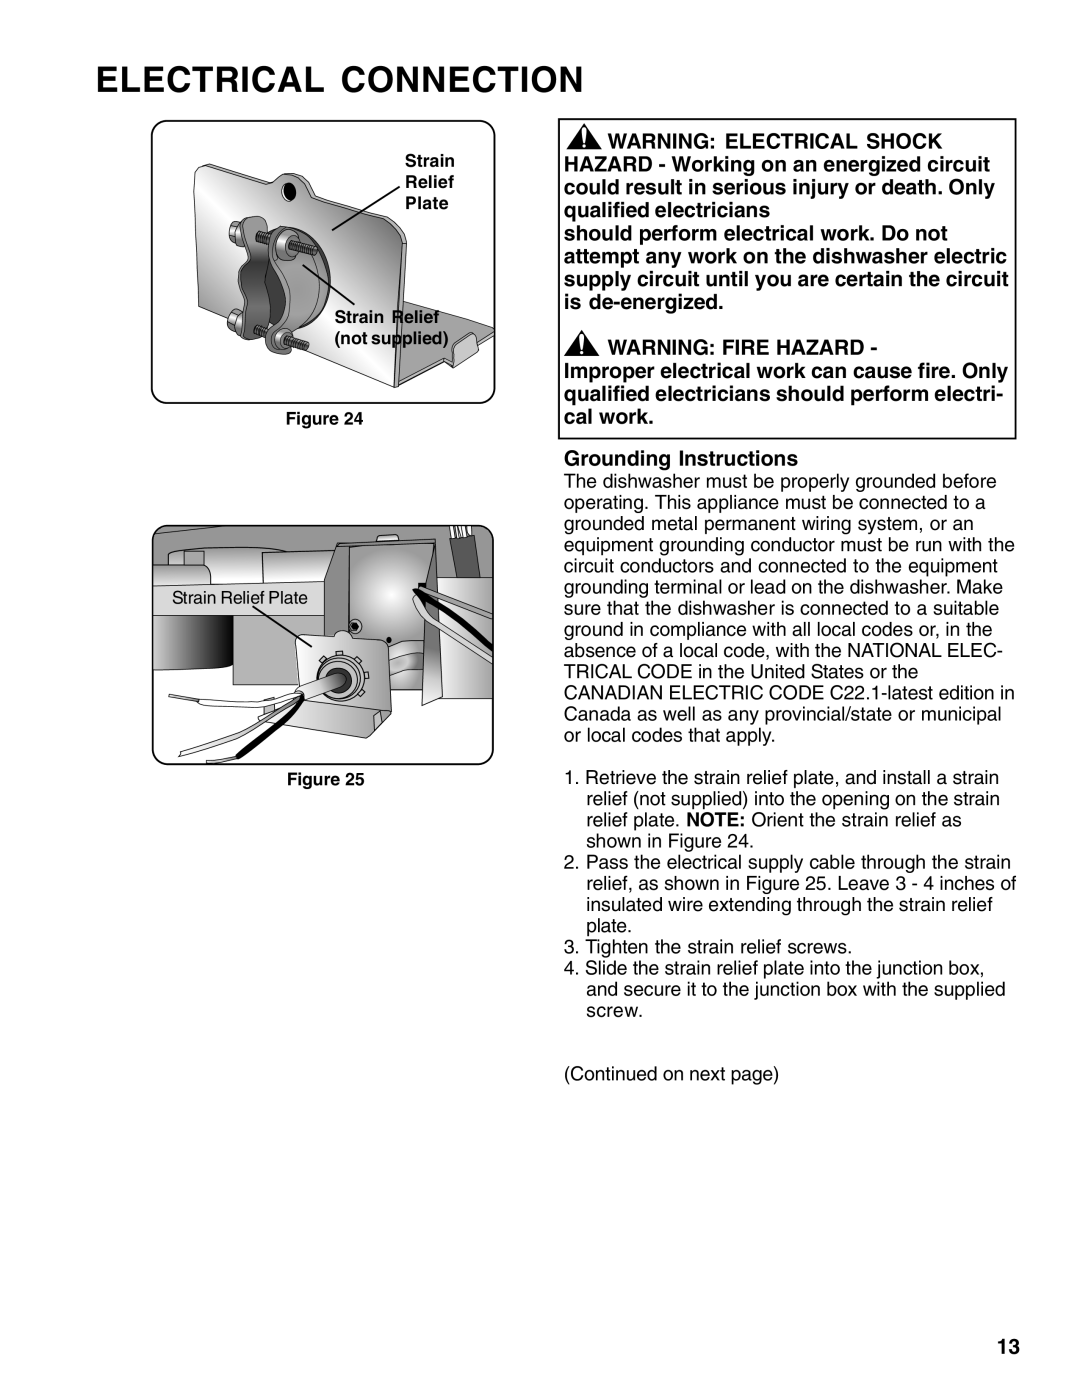 Thermador 9000039271 installation instructions Electrical Connection, Warning Fire Hazard, Grounding Instructions 